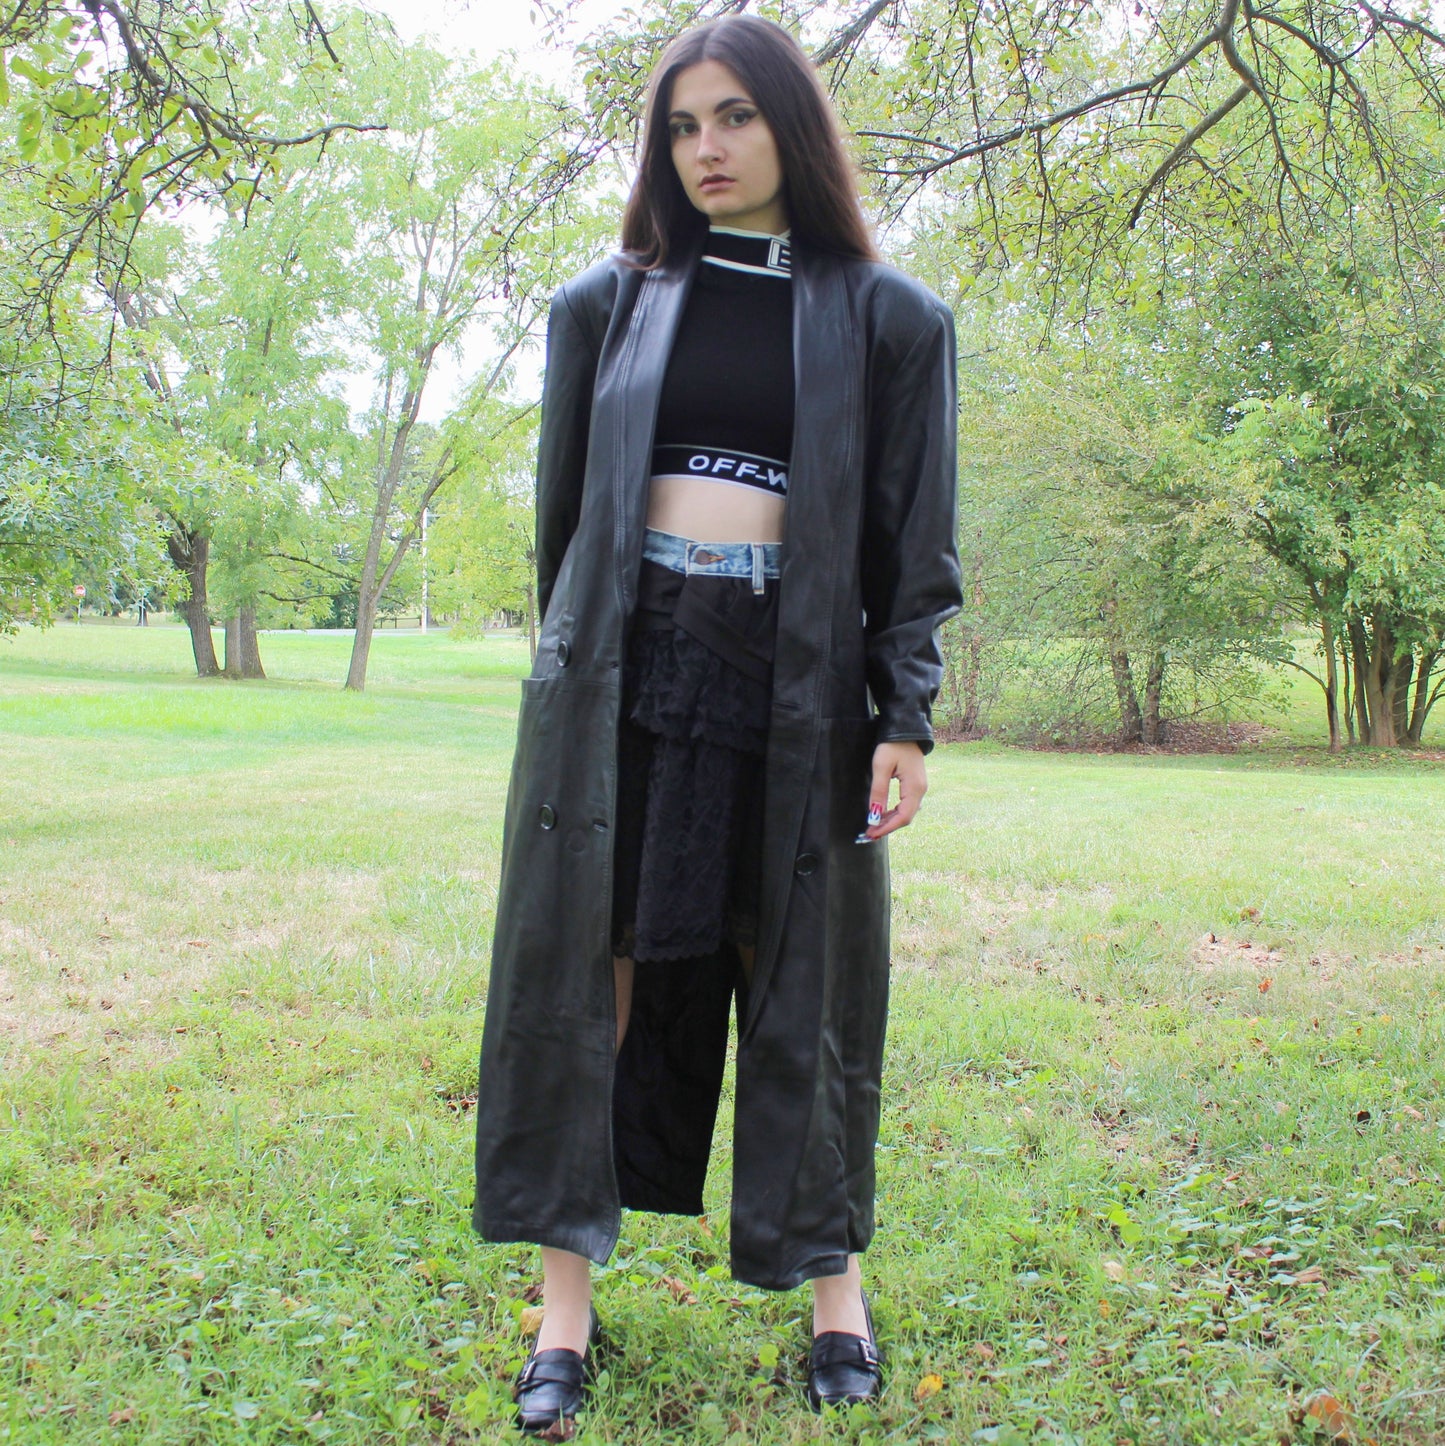 Vintage 90s Leather Trench Coat by Sabrina